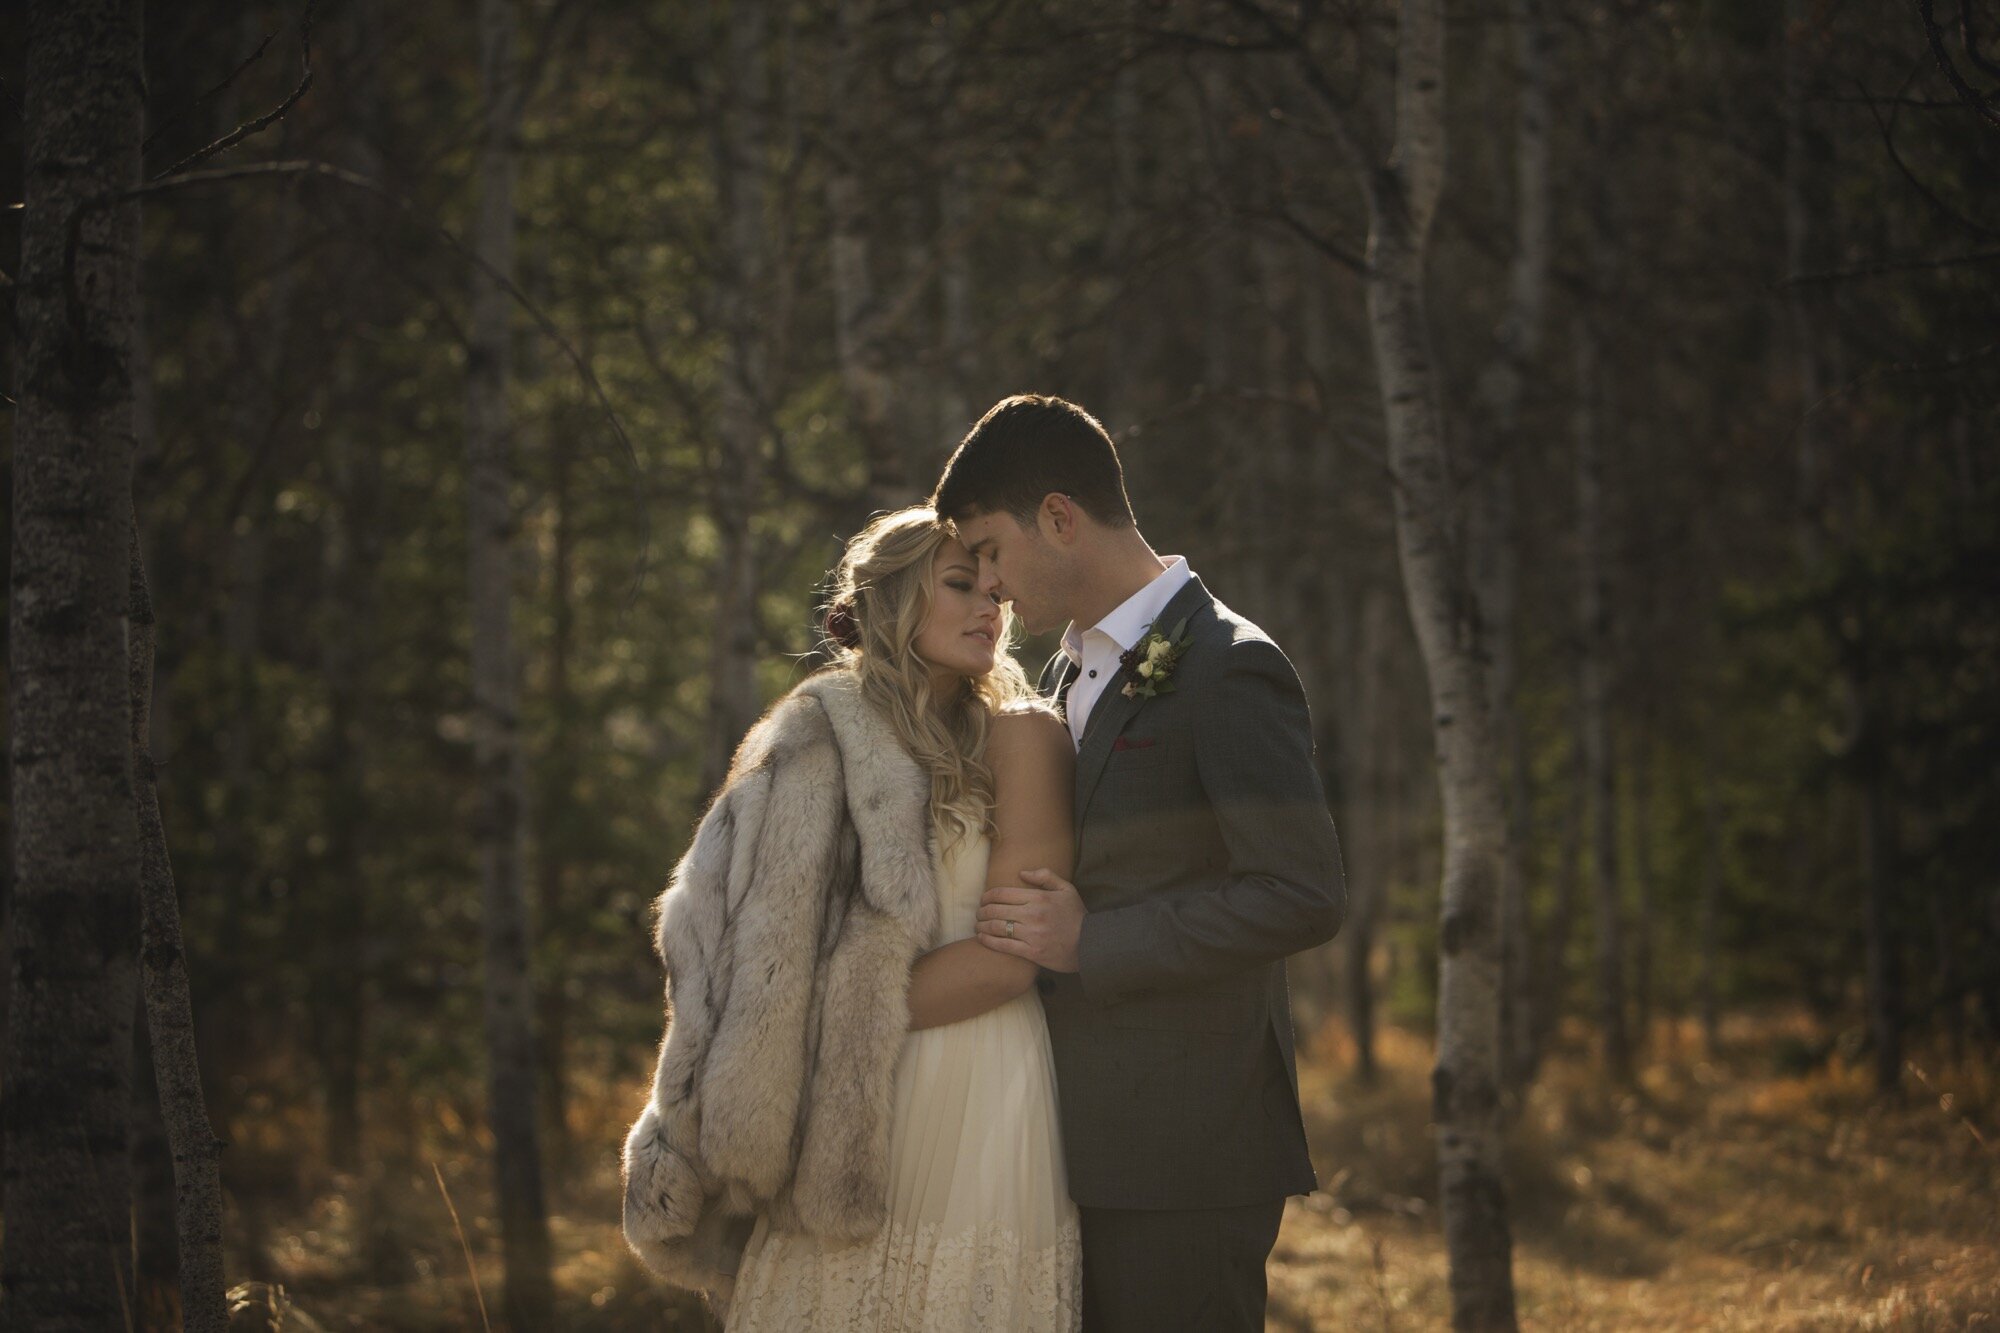 Bliss Photographic canmore fall wedding portrait.jpg